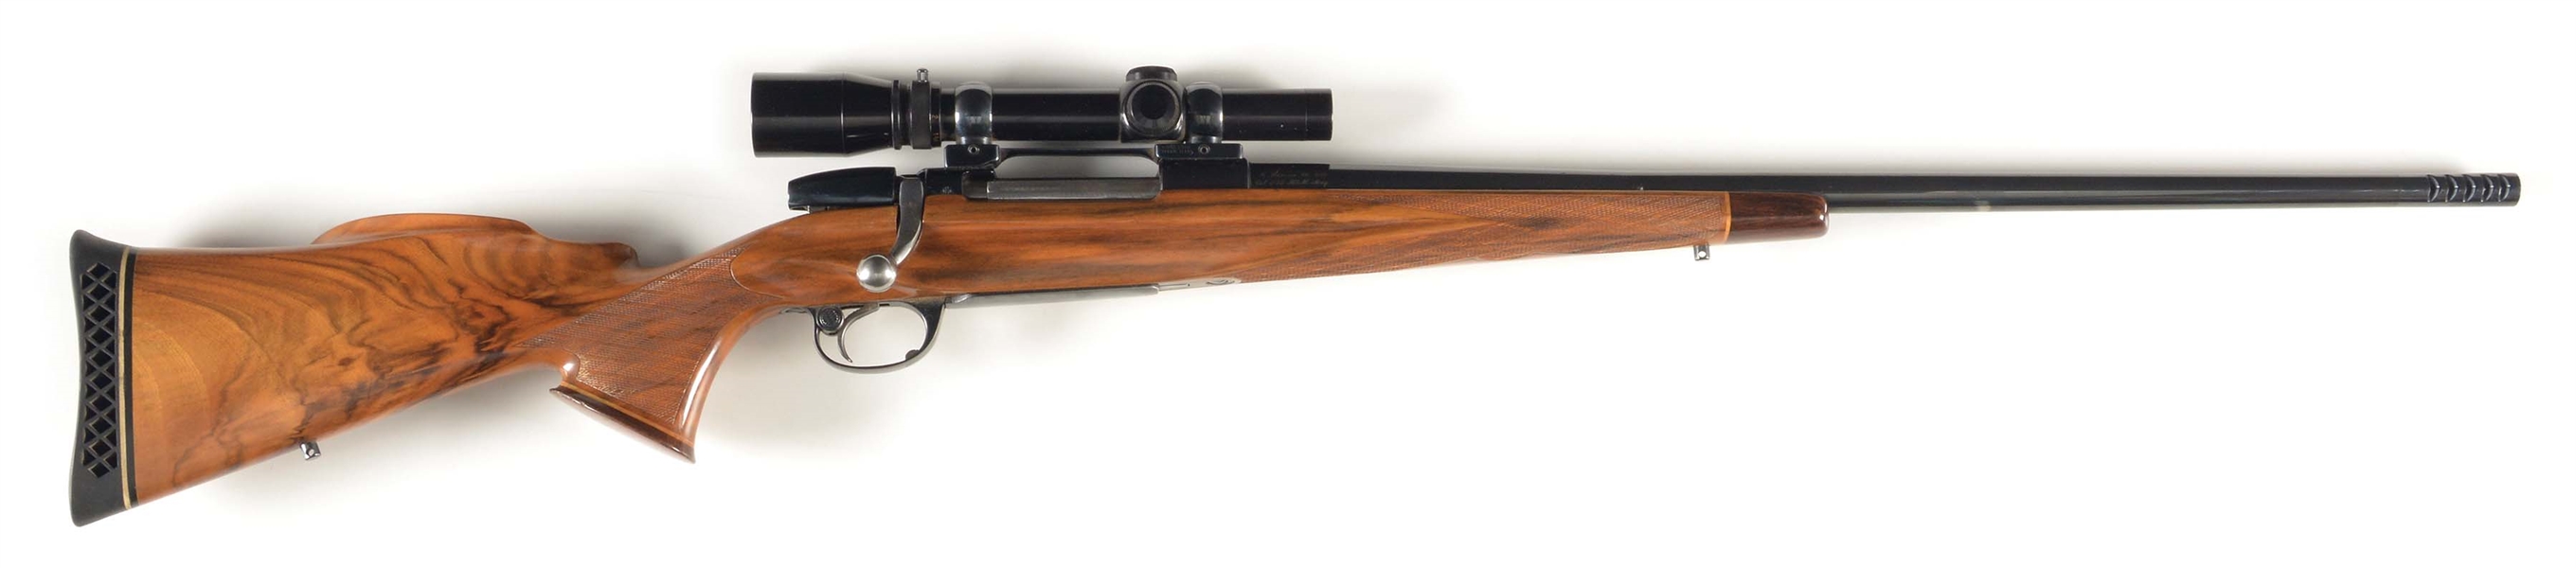 (M) H. LAMSON 98 CUSTOM BOLT ACTION RIFLE WITH SCOPE